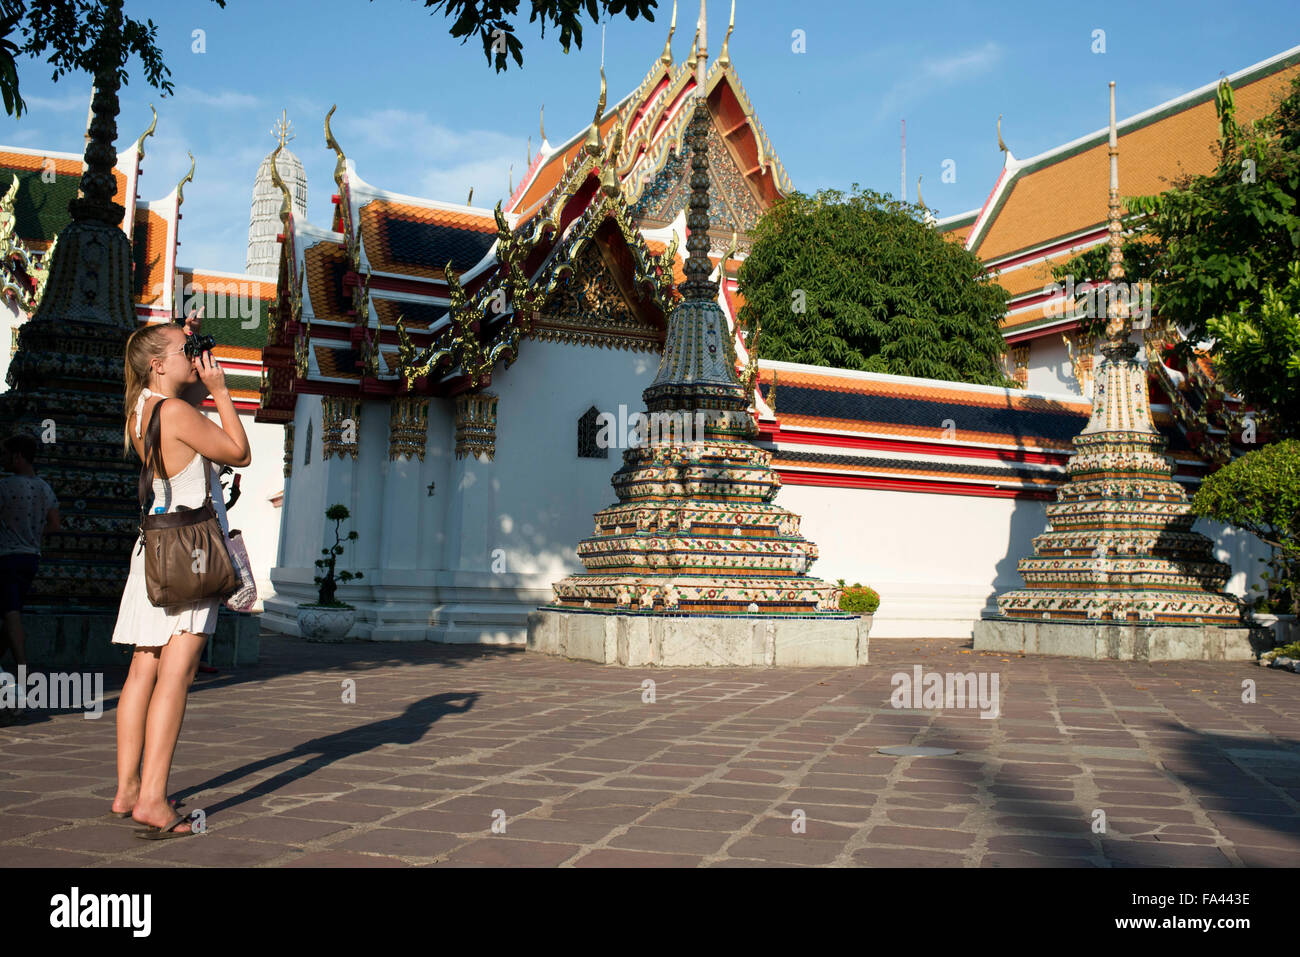 Wat Pho Temple, Bangkok, Thailand. Wat Pho (the Temple of the Reclining Buddha), or Wat Phra Chetuphon, is located behind the Te Stock Photo